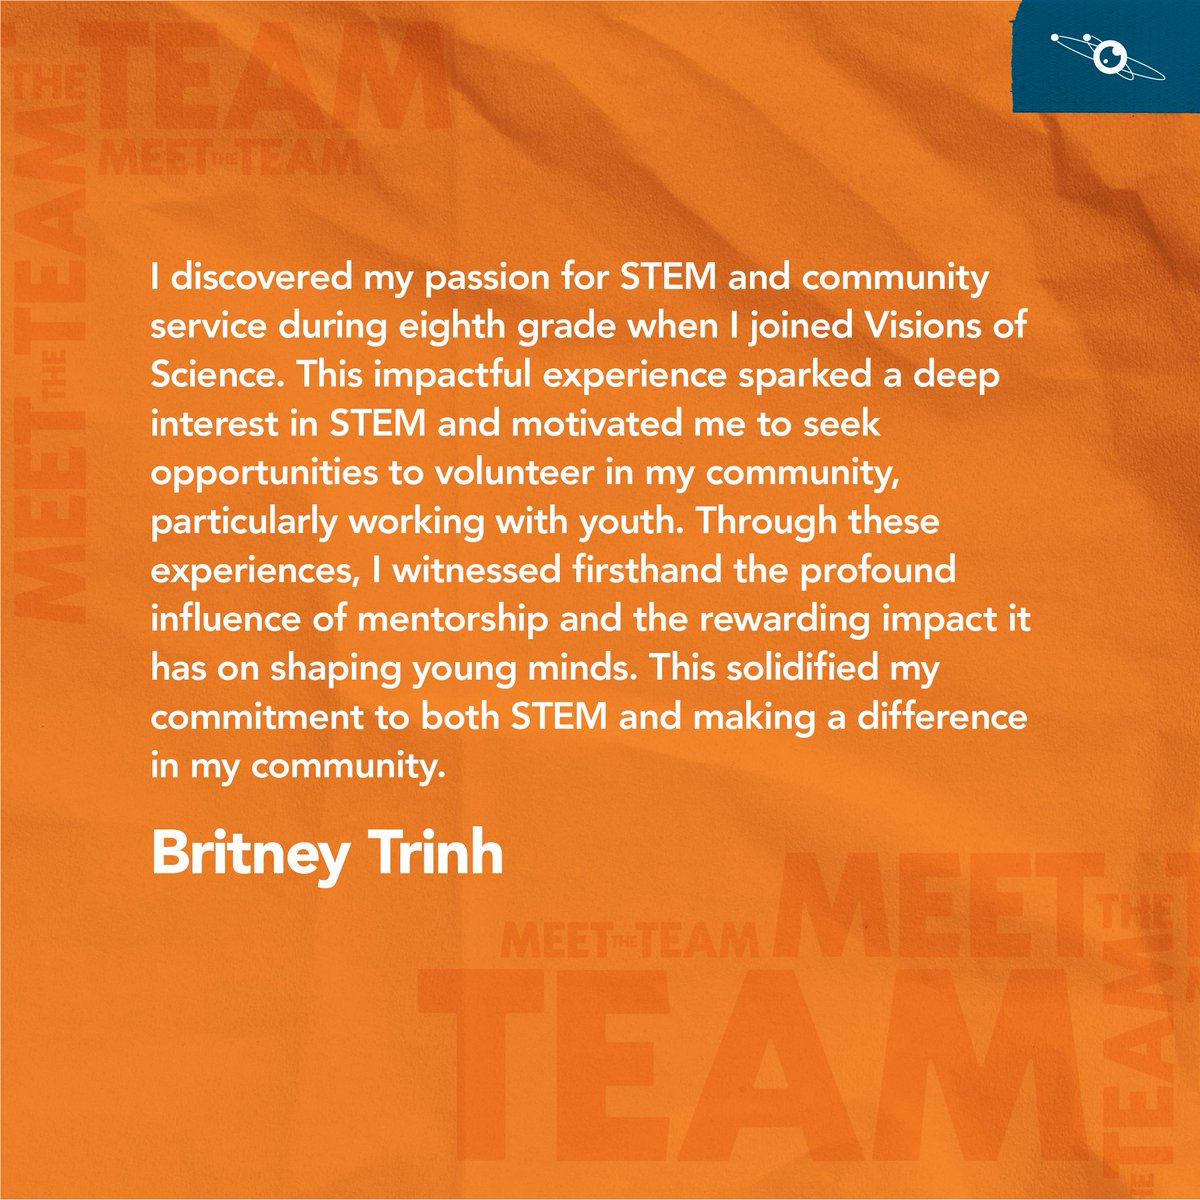 🌟 This week, we're happy to introduce Ahmed Ali Sharif and Britney Trinh, two inspiring members of the Empower and Elevate programs here at Visions. 

Follow their stories while you get to know the lit STEM crew for this season's programs. #MeetTheTeam #STEM #WeAreSTEM